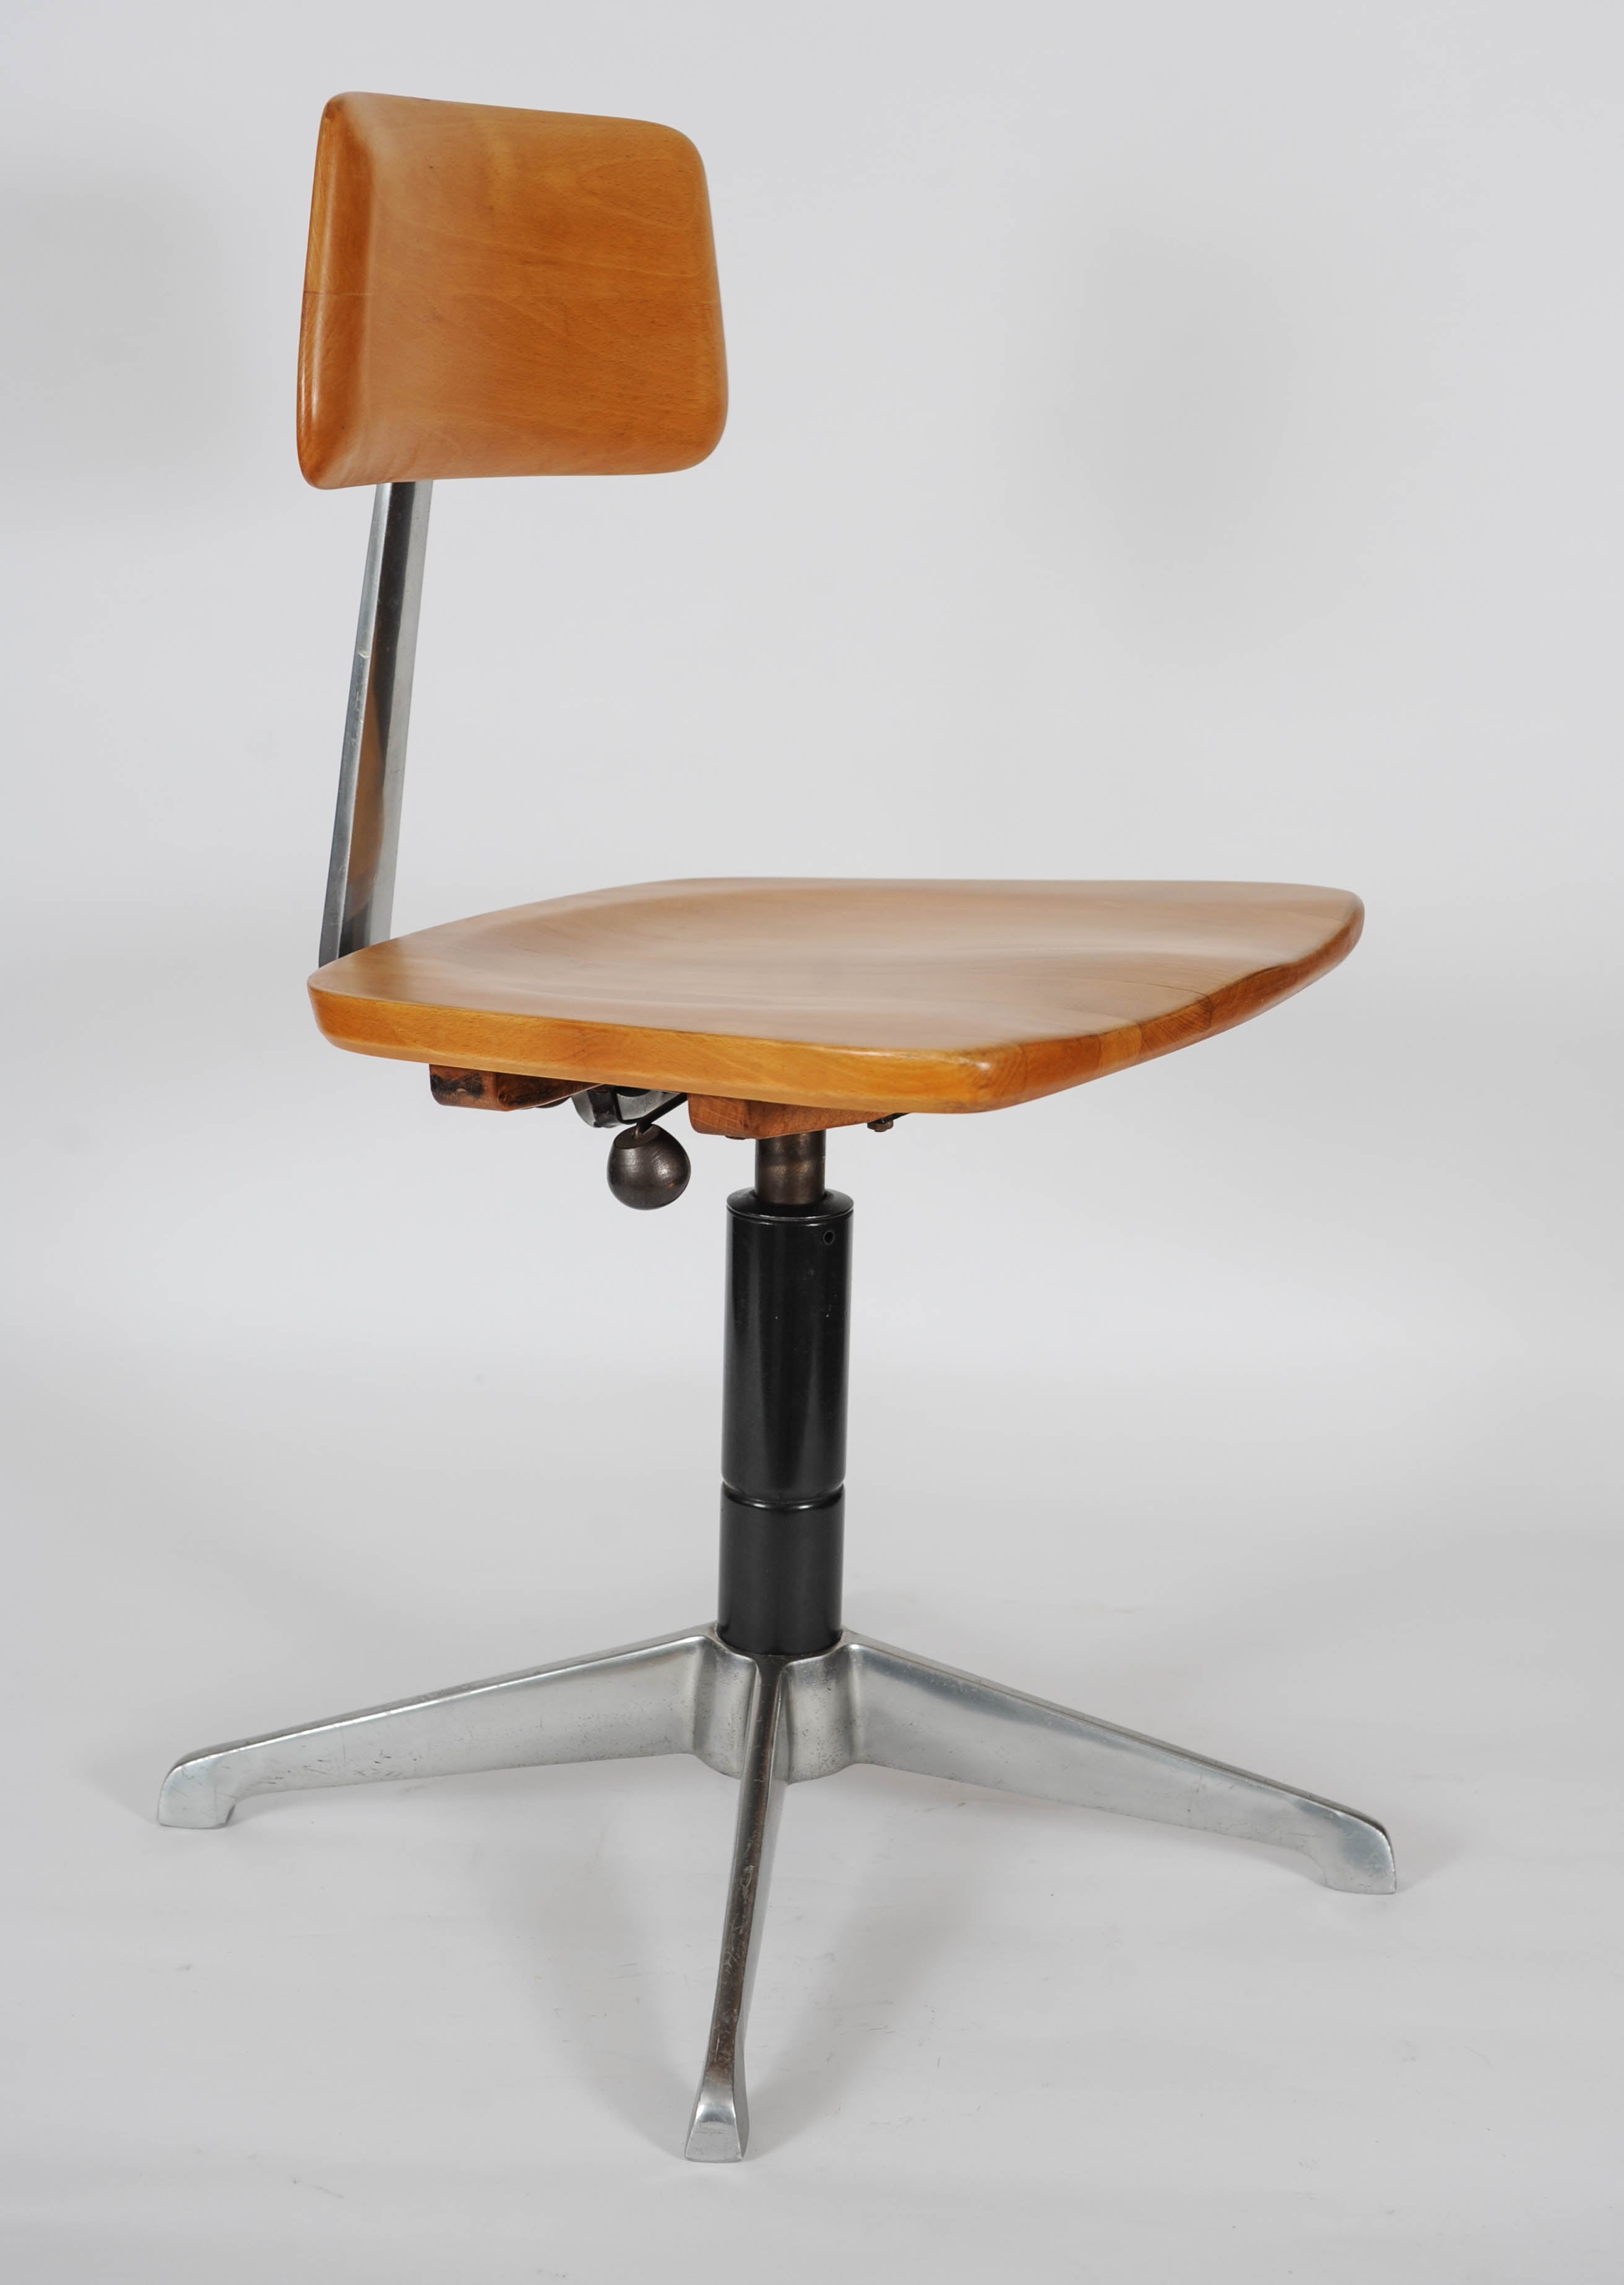 Midcentury Architect's Chair made of Stainless Steel and Wood named Sedus 1